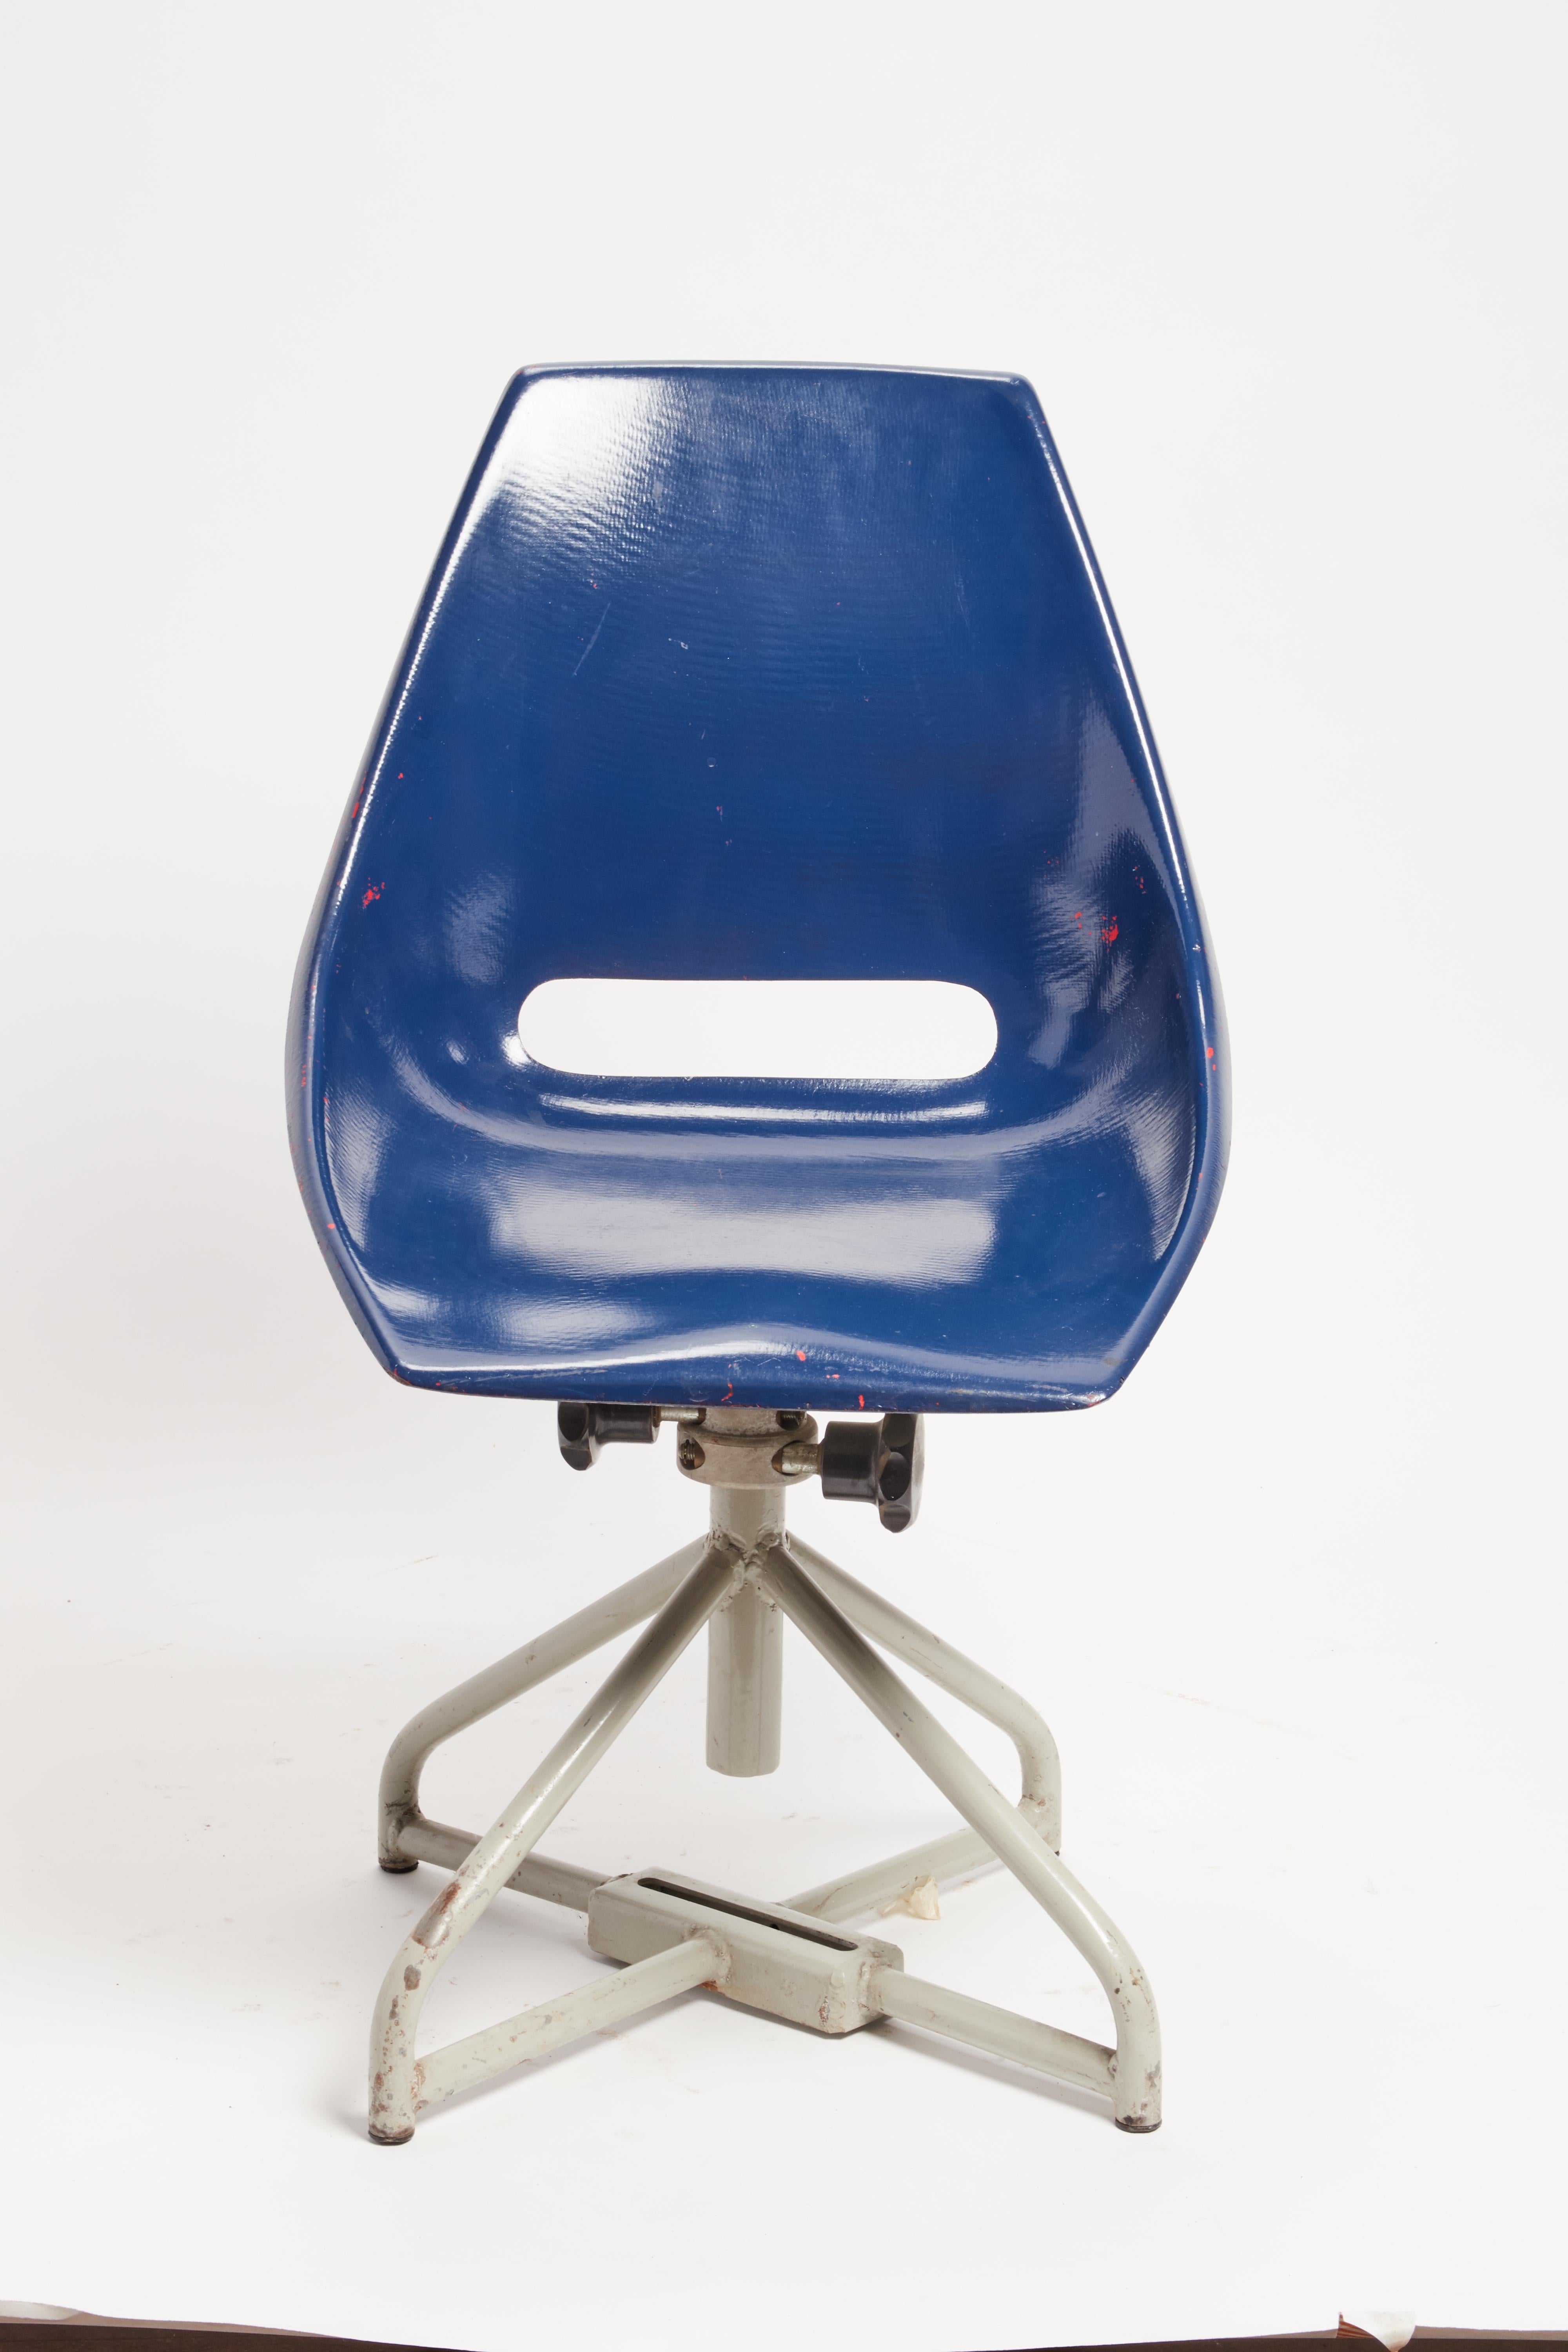 Multicolor Adjustable Fiberglass Chairs, Italy, 1950 For Sale 4